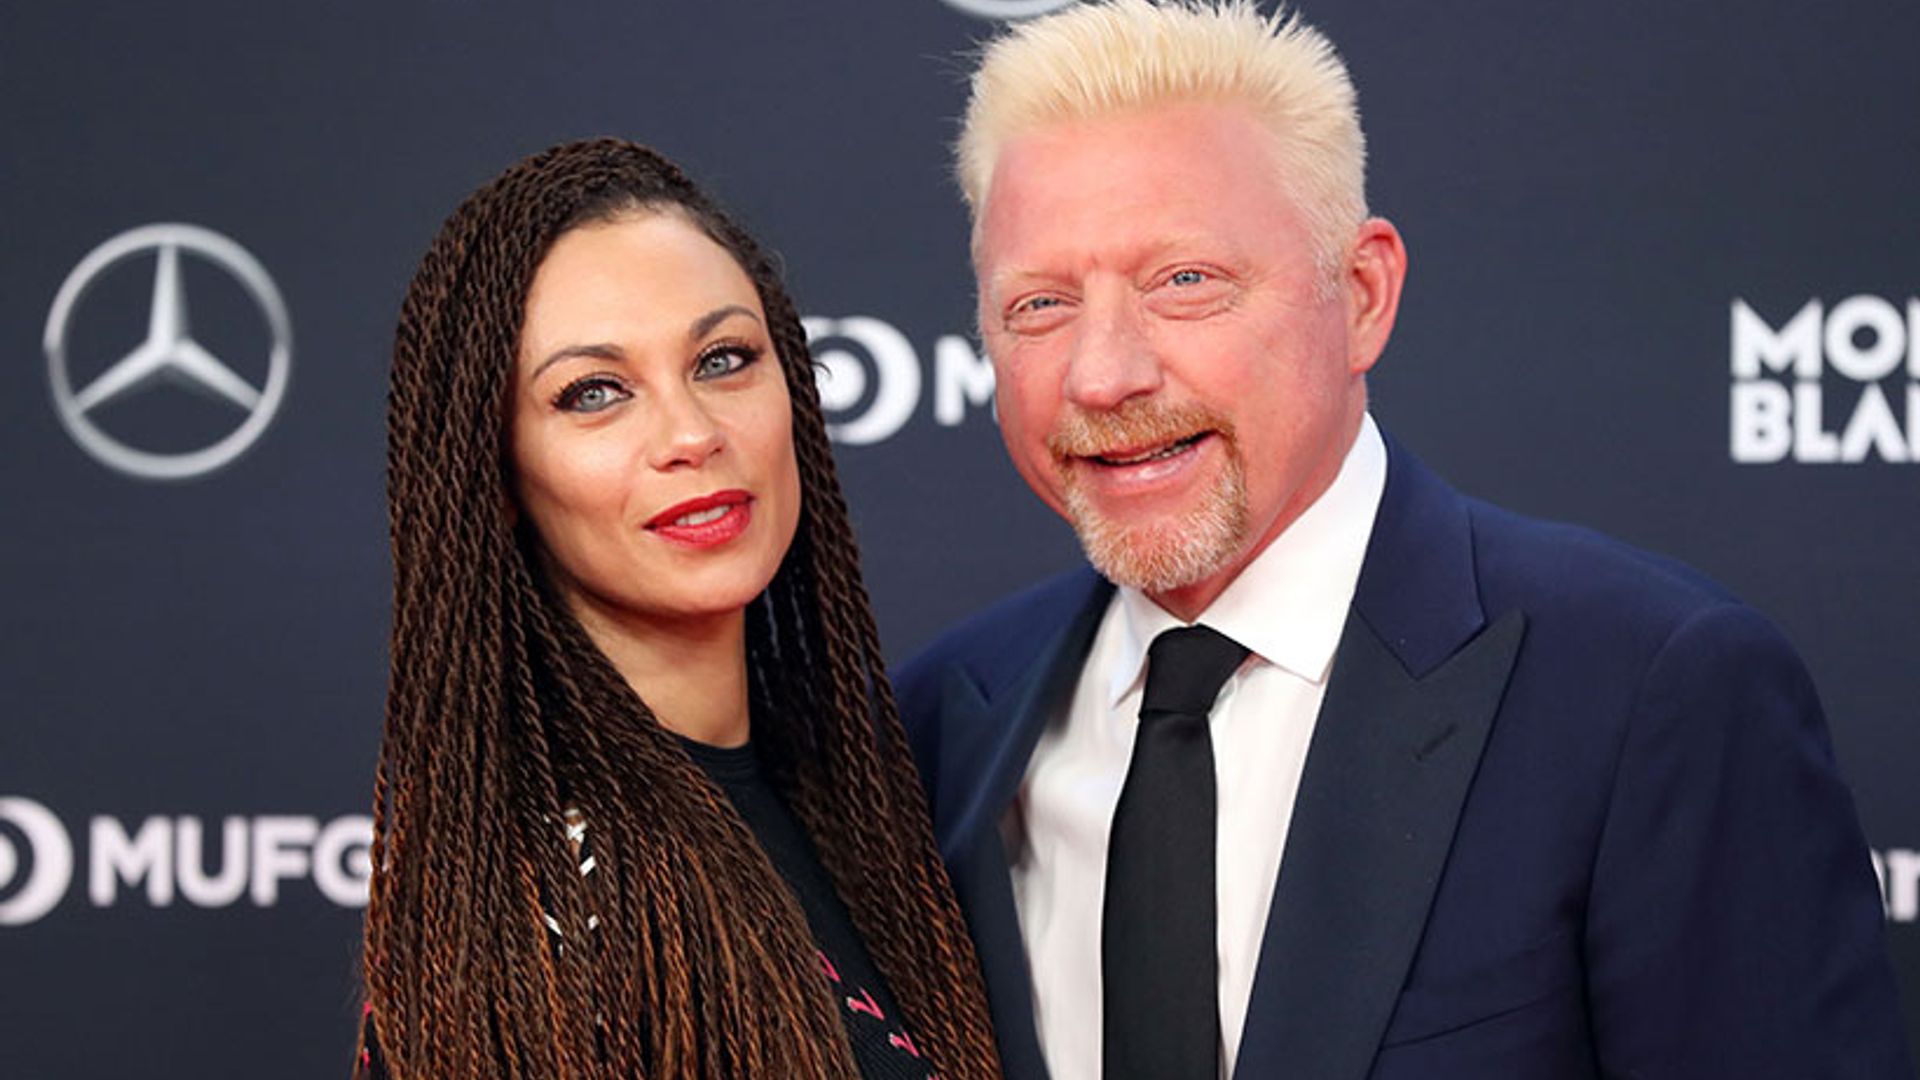 Wimbledon champion Boris Becker splits from wife Lilly after nine years of marriage